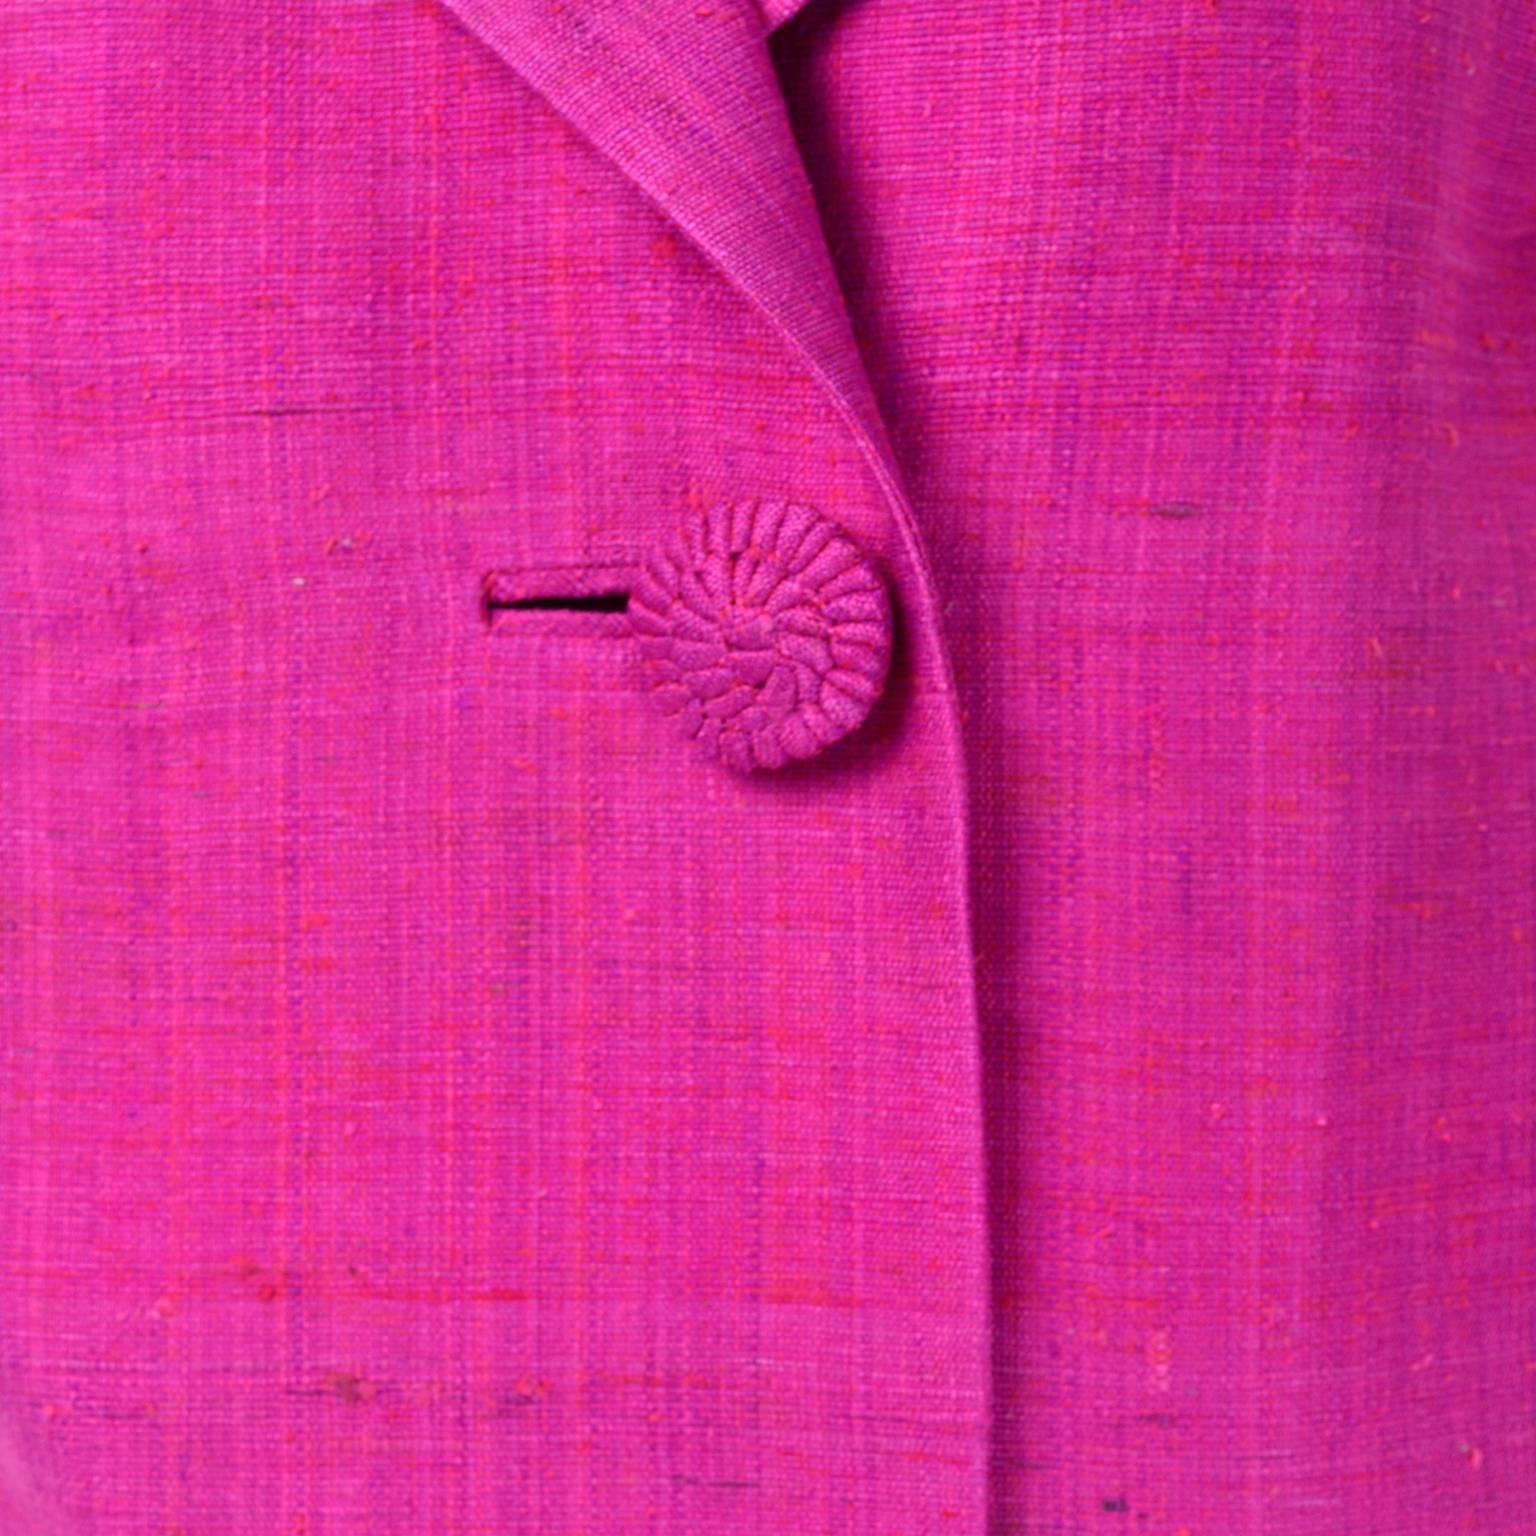 This lovely pink Haz’ls Exclusive silk coat was made in Hong Kong in the 1960's. There are three large woven buttons down the front and the coat is fully lined in pink silk. The sleeves are slightly cropped and the coat is cut in the classic 60's